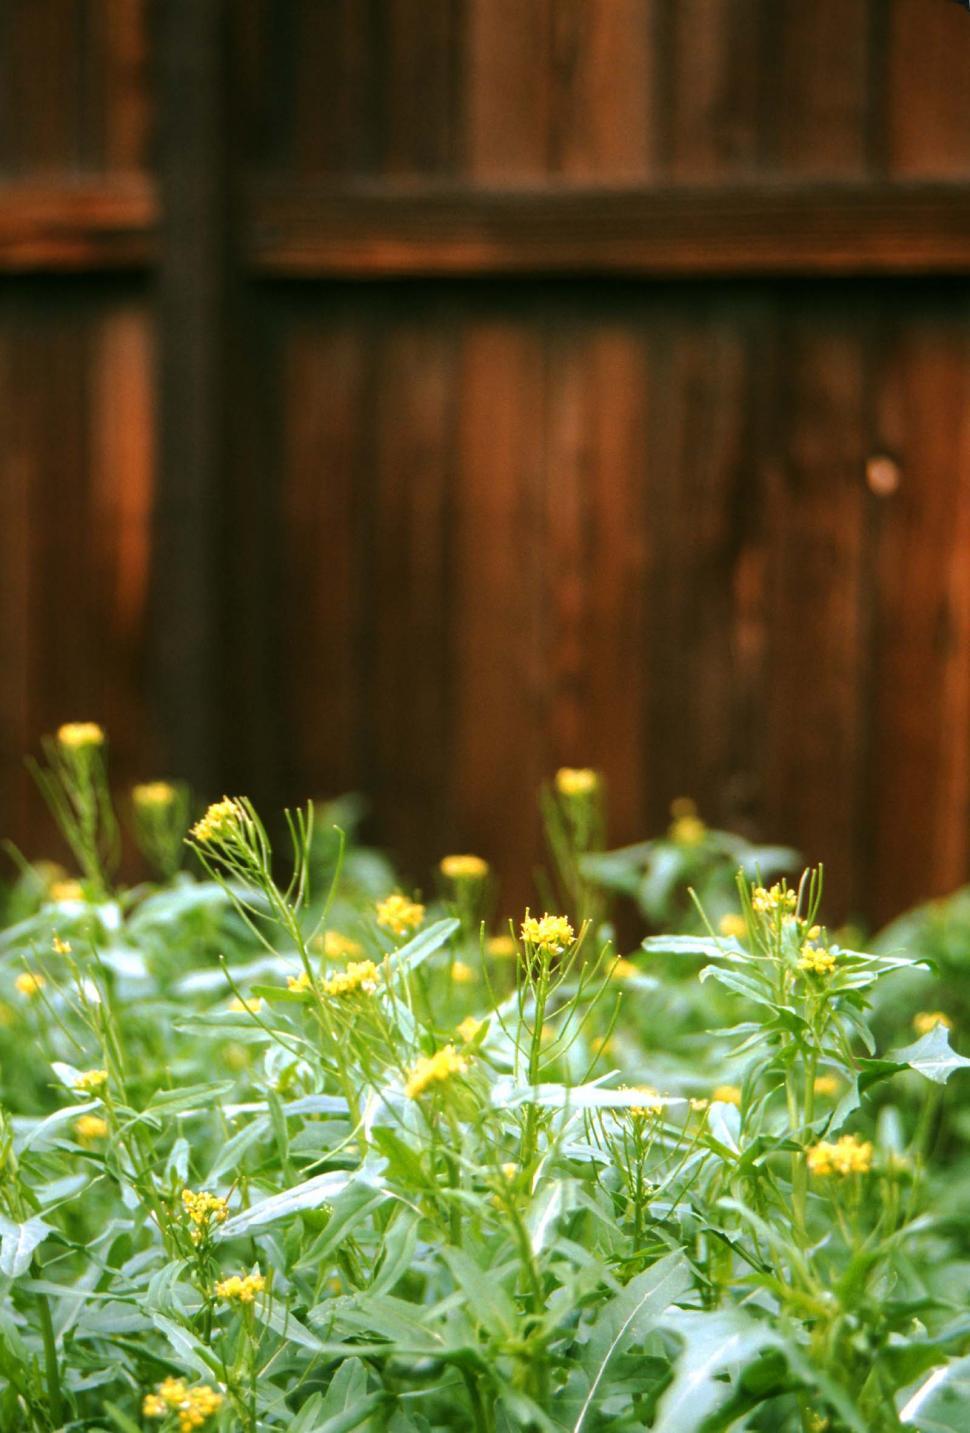 Free Image of Weeds and wooden fence 